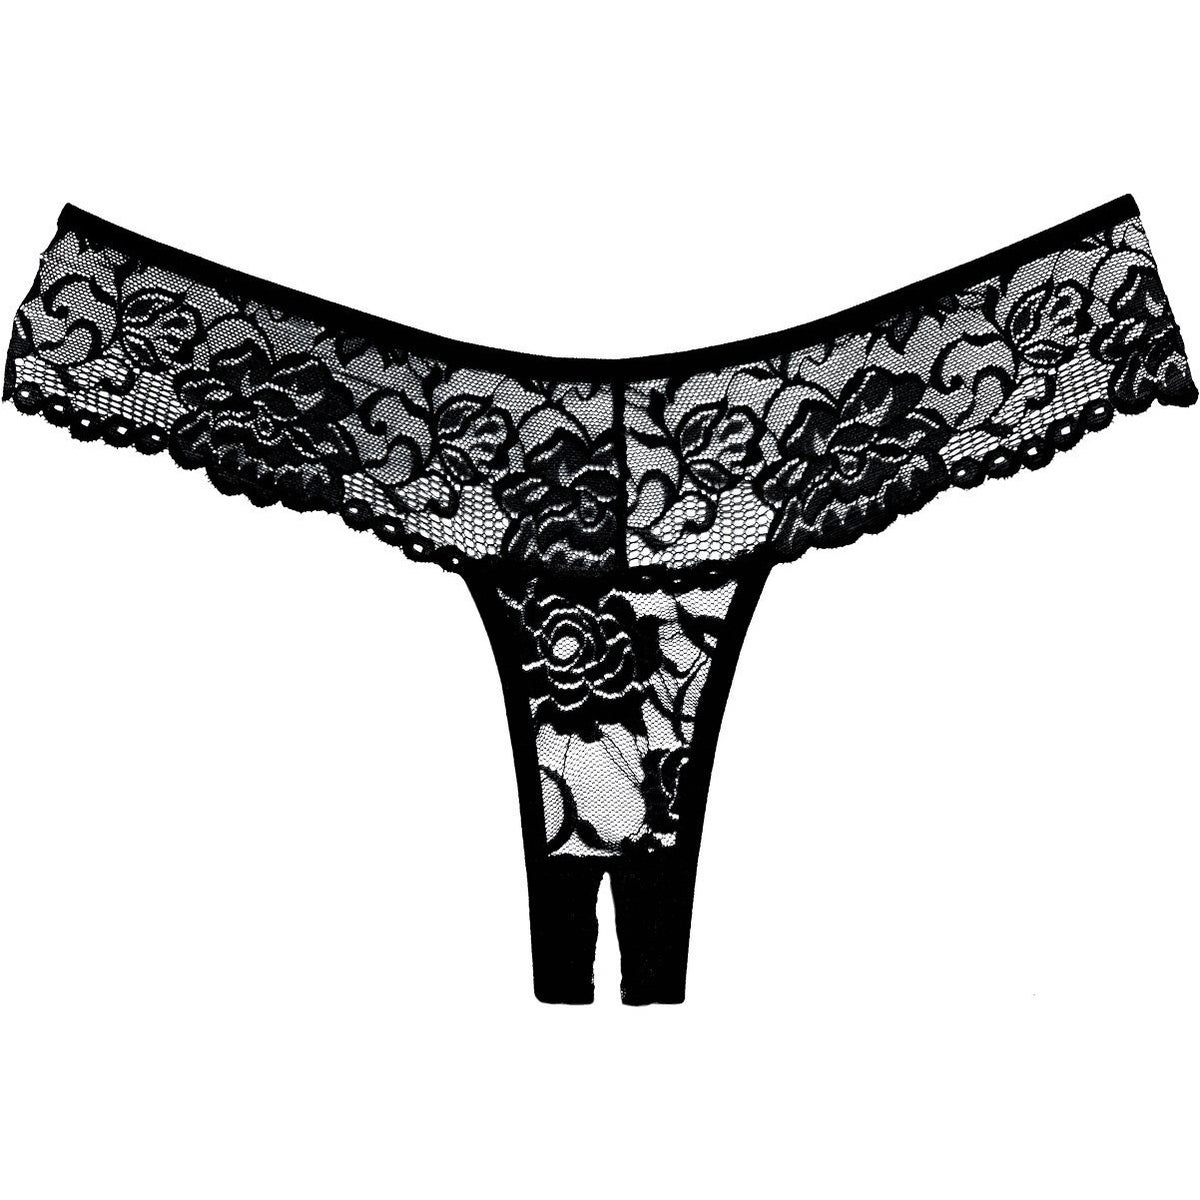 Allure Adore – Lace Crotchless Thong/ Panty - Black